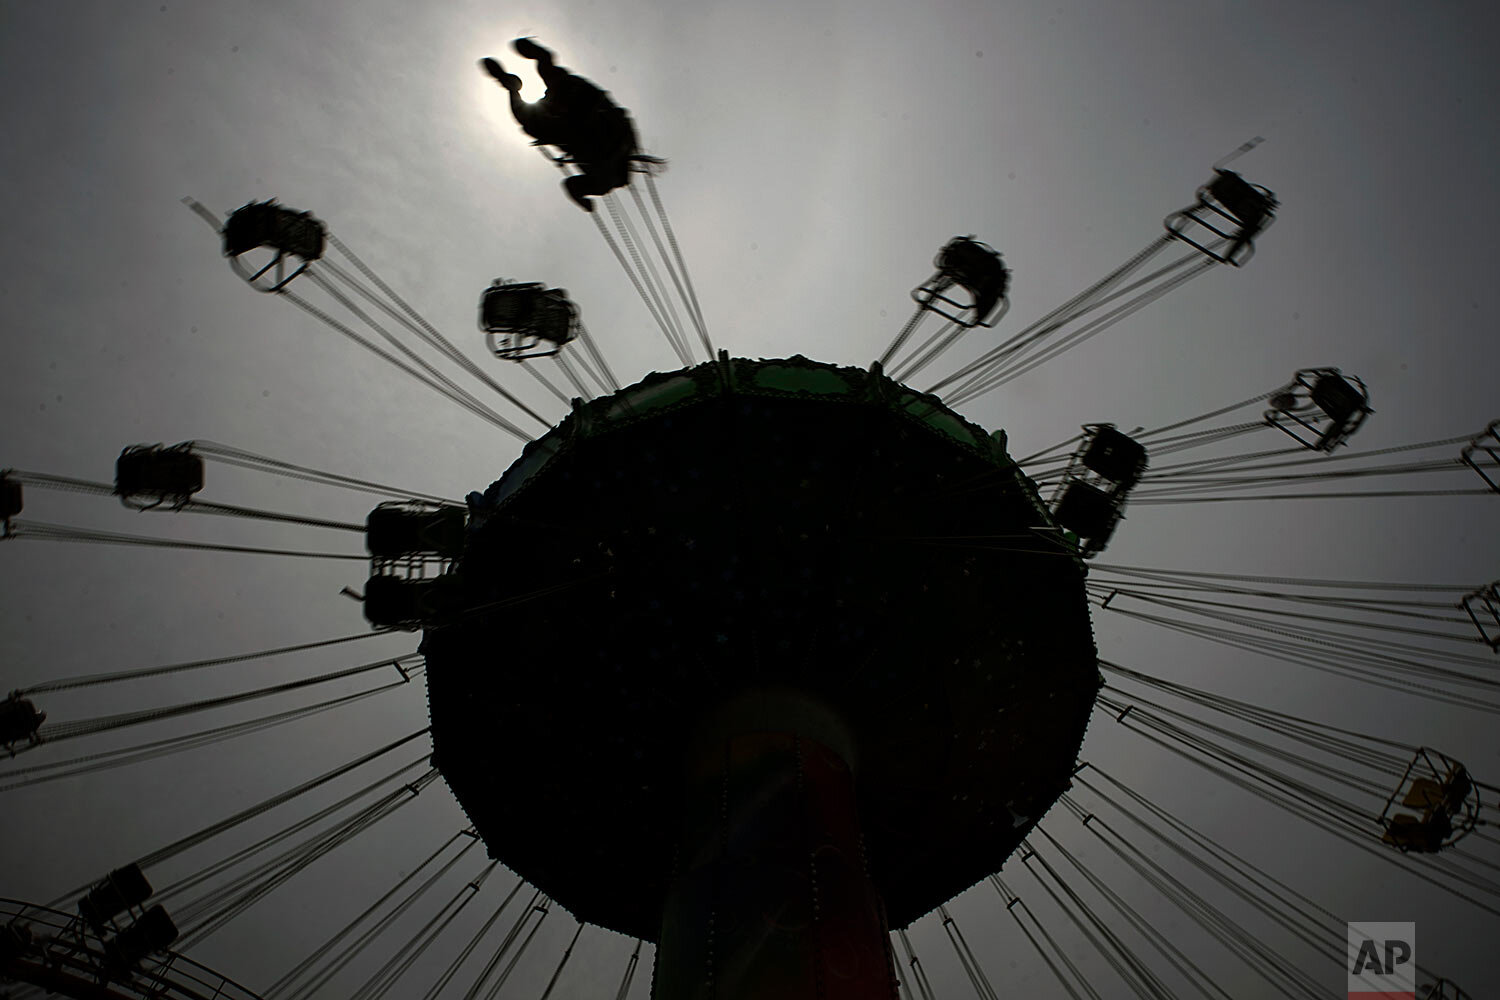  A visitor enjoys a swing ride at the Yomiuriland amusement park in Tokyo, Tuesday, June 16, 2020.  (AP Photo/Eugene Hoshiko) 